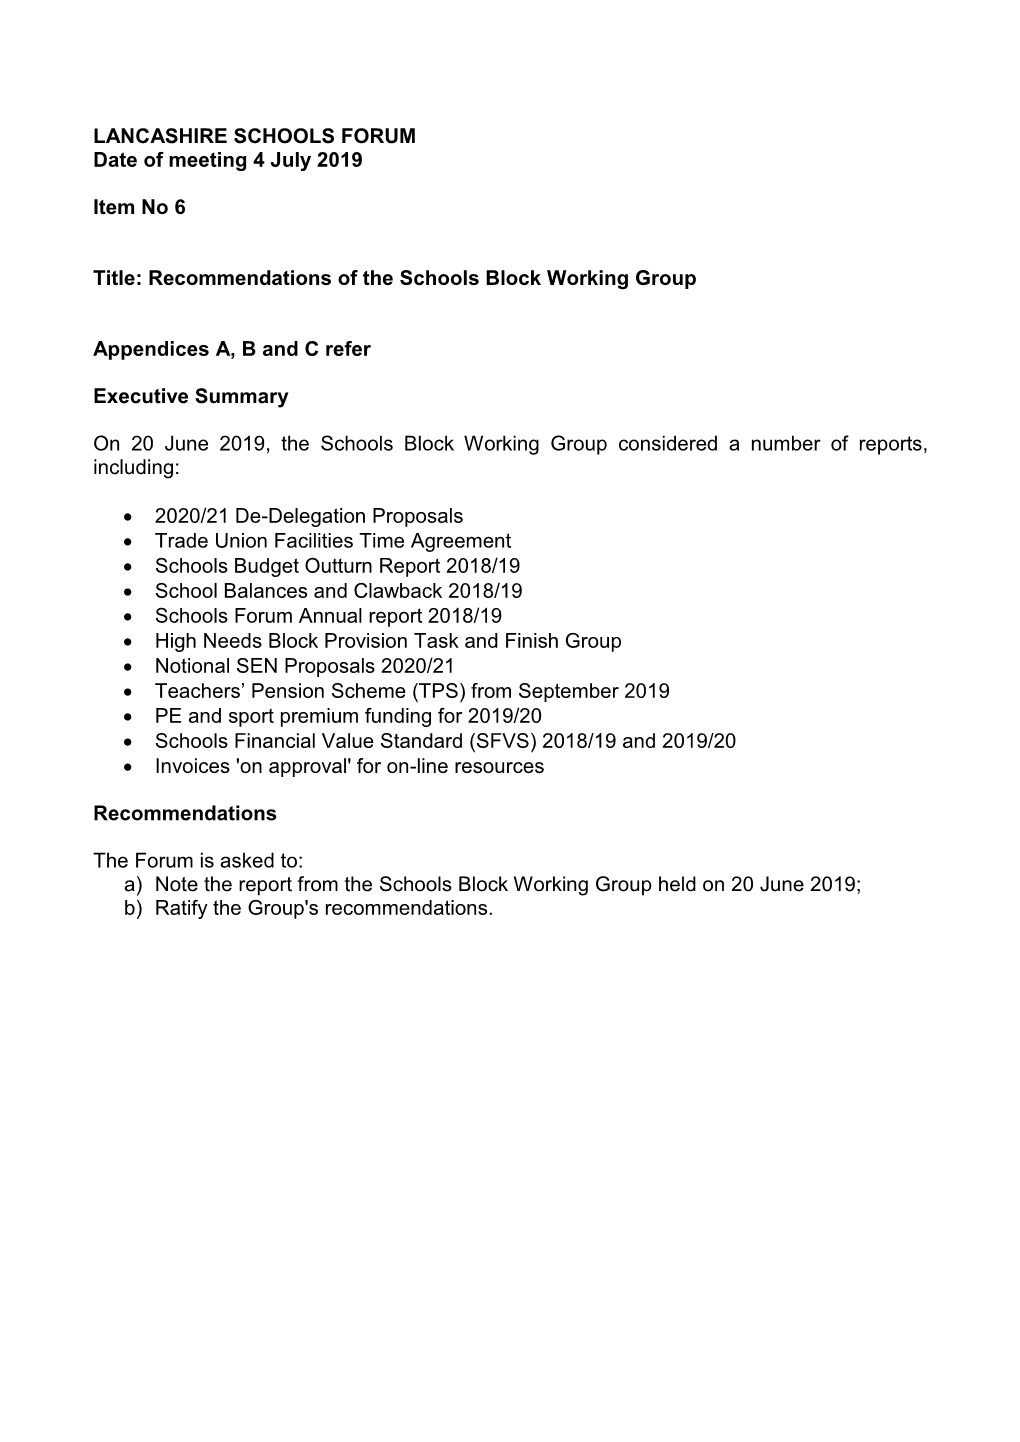 Recommendations of the Schools Block Working Group